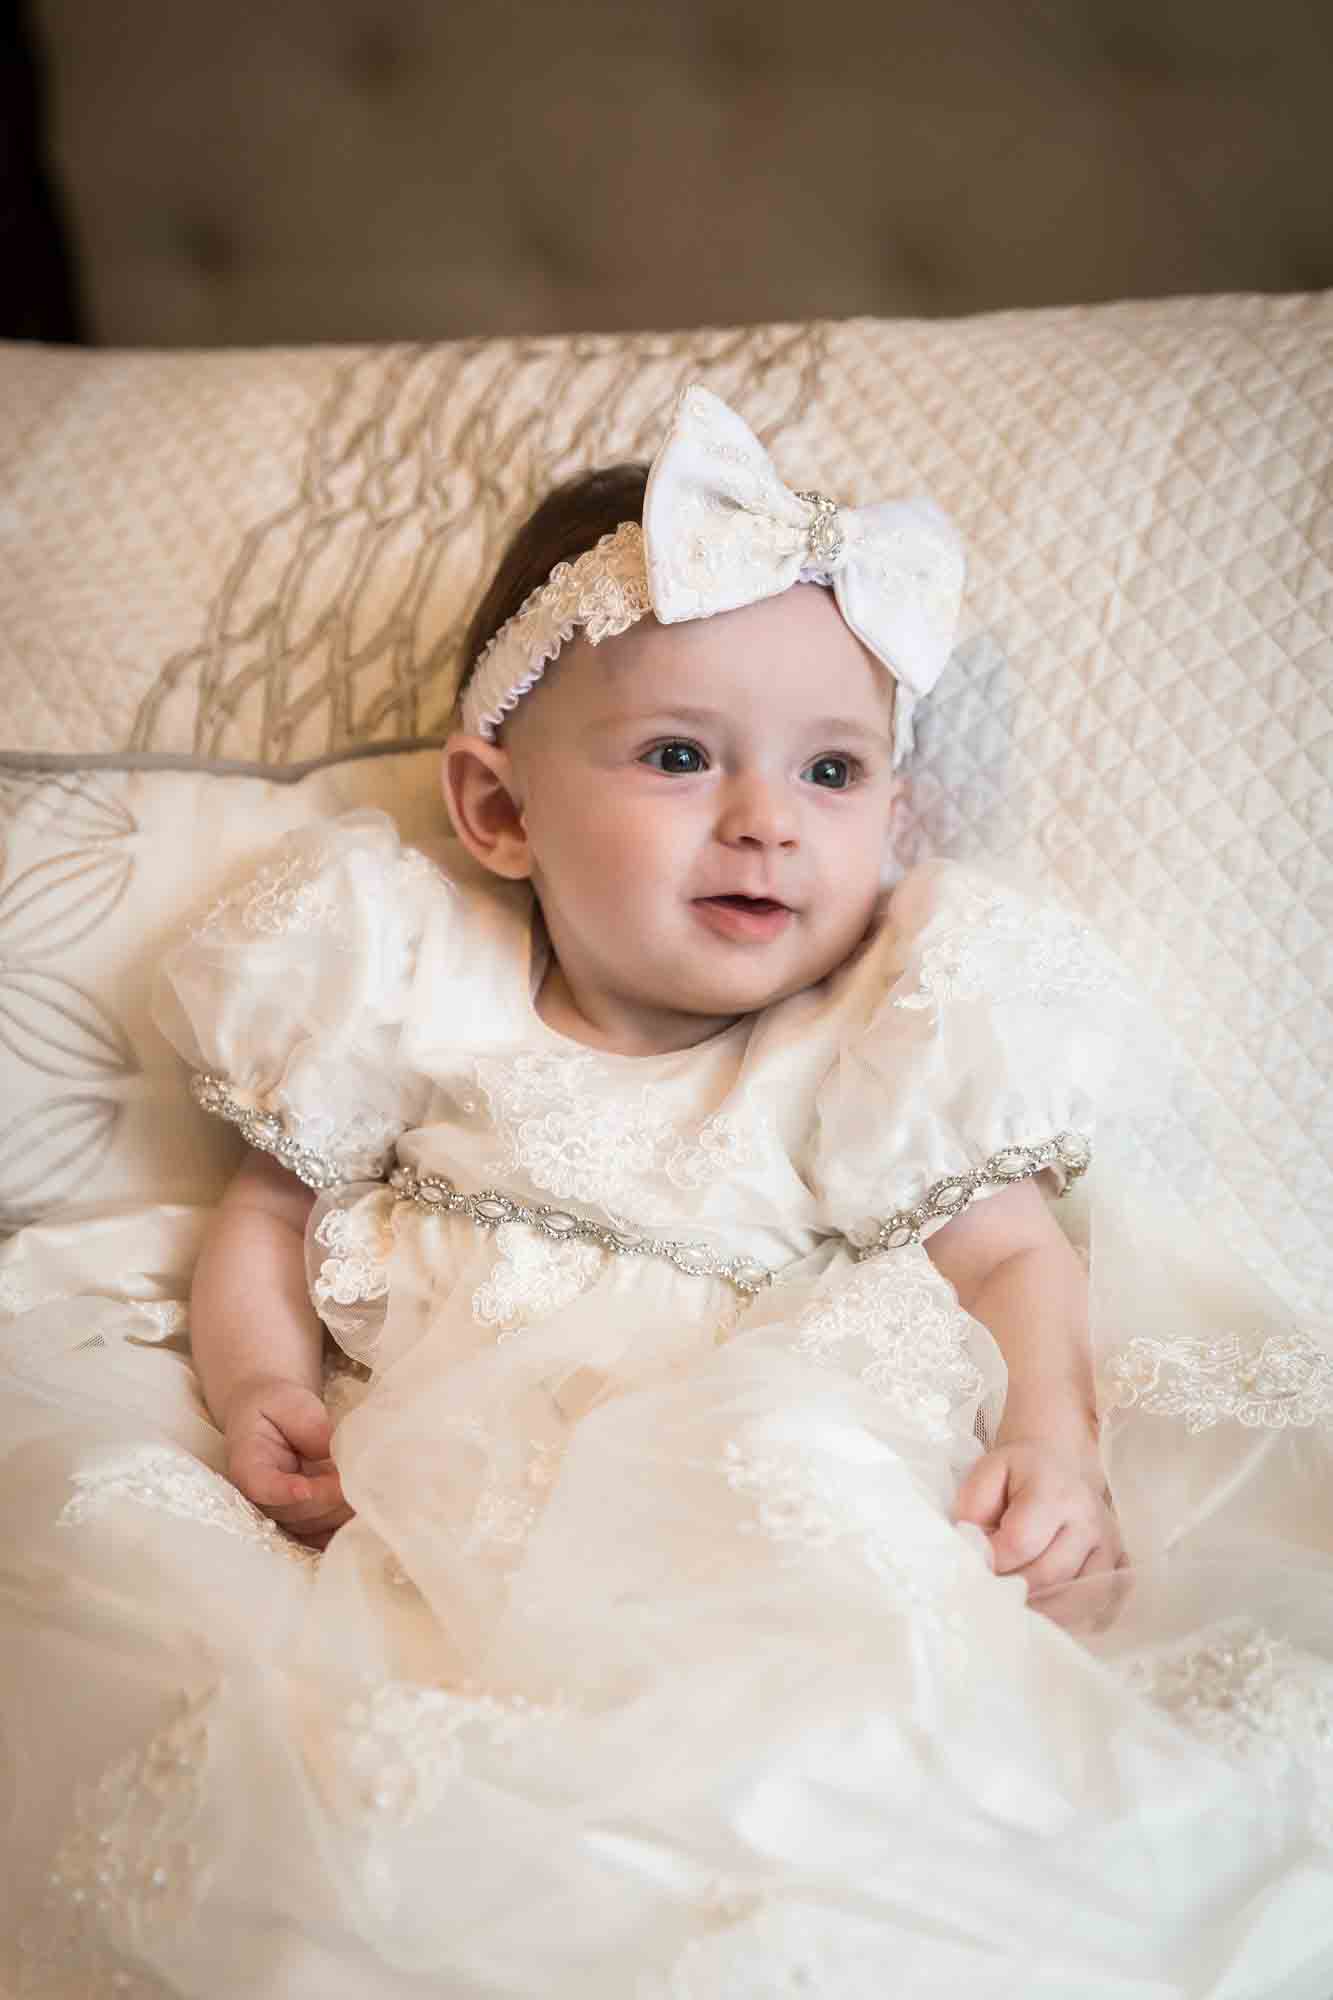 Baby girl wearing white baptism dress and white bow sitting in front of pillows